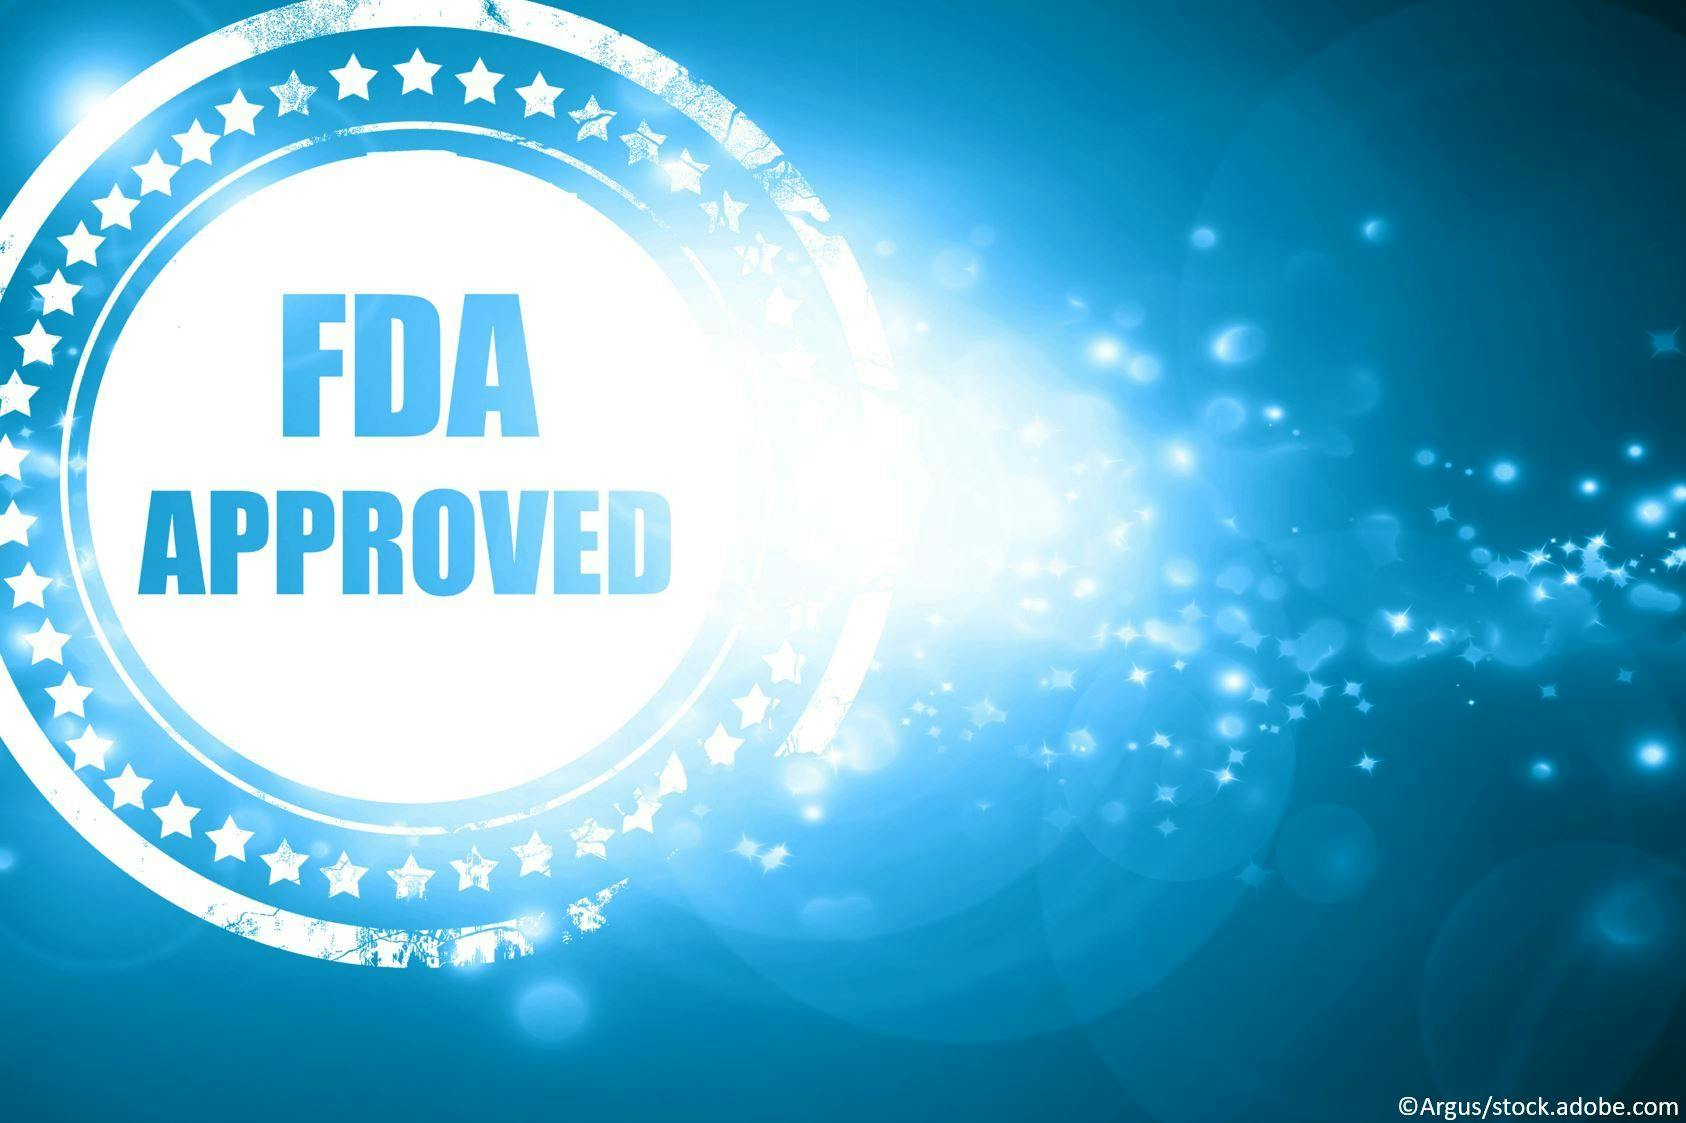 FDA Approves Buprenorphine Extended-release Injection for Moderate-to-Severe Opioid Use Disorder